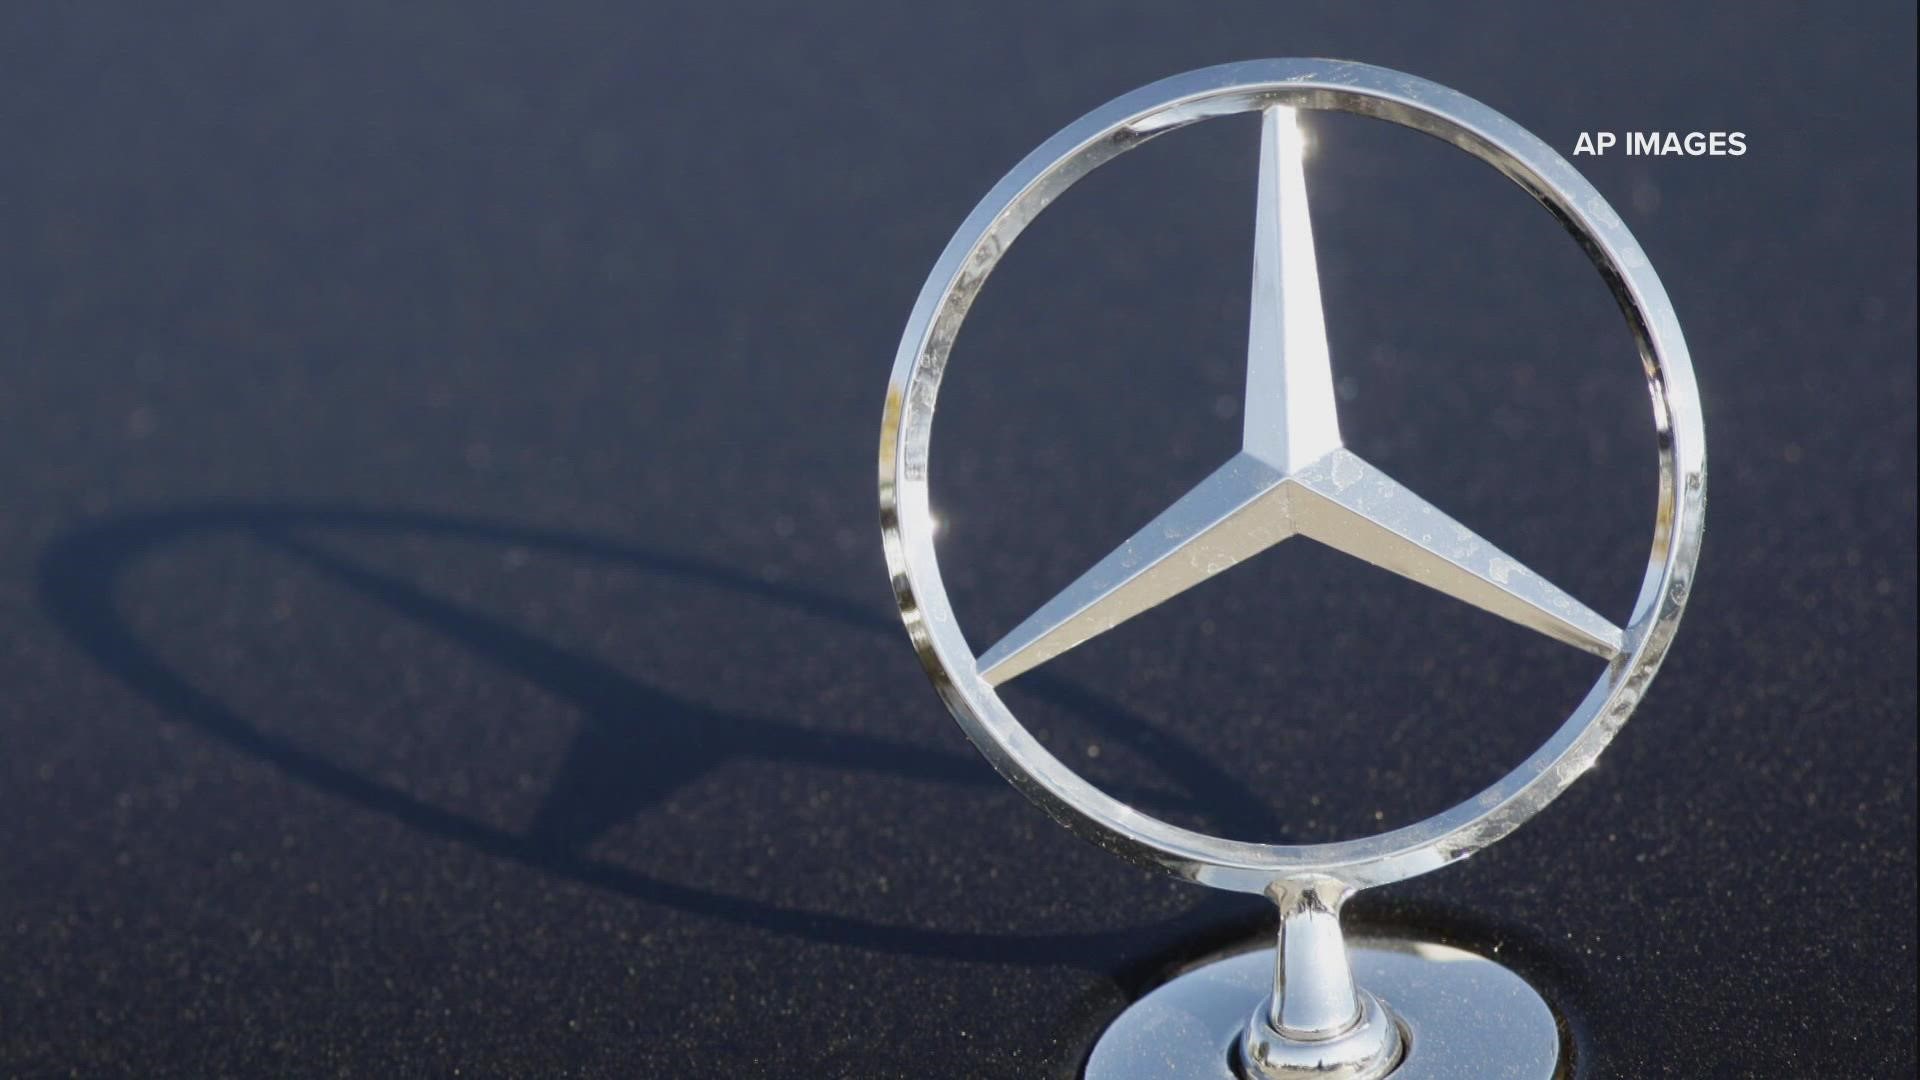 For $1,200 a year, Mercedes-Benz is offering an acceleration "speed up" subscription to electric vehicle owners.